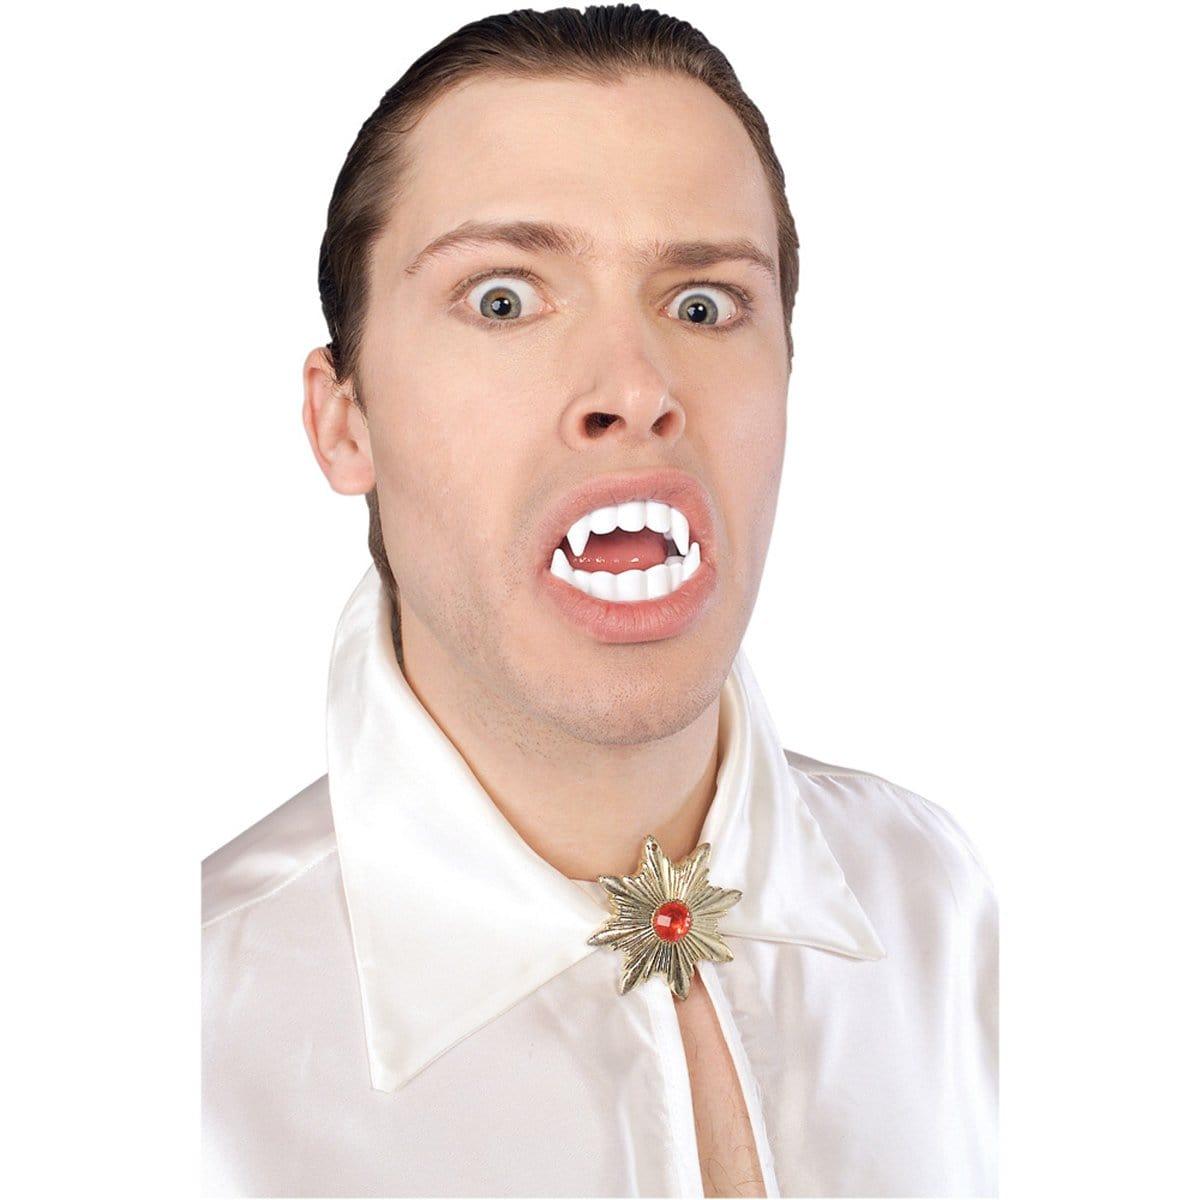 Buy Costume Accessories Stay-put vampire teeth sold at Party Expert